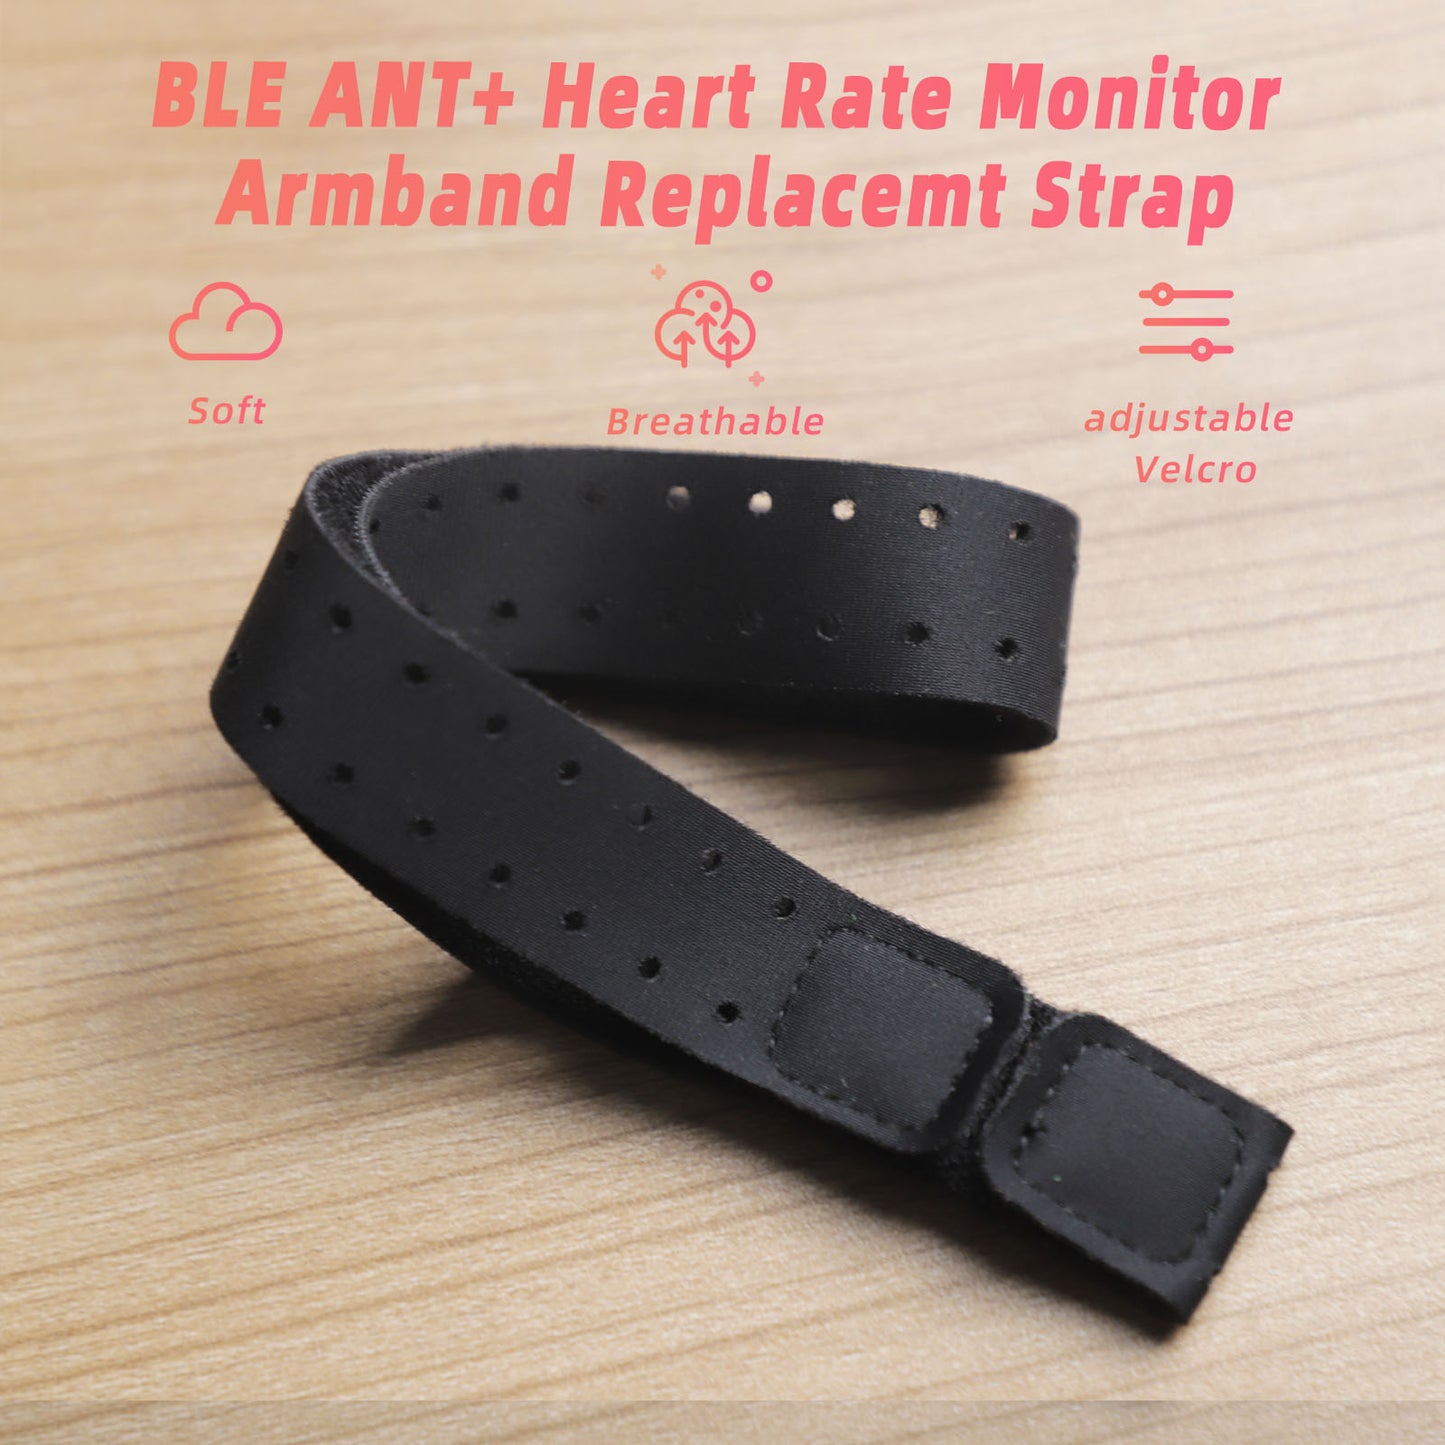 Upgrade Your Heart Rate Monitor: Introducing the Premium ArmBand Strap